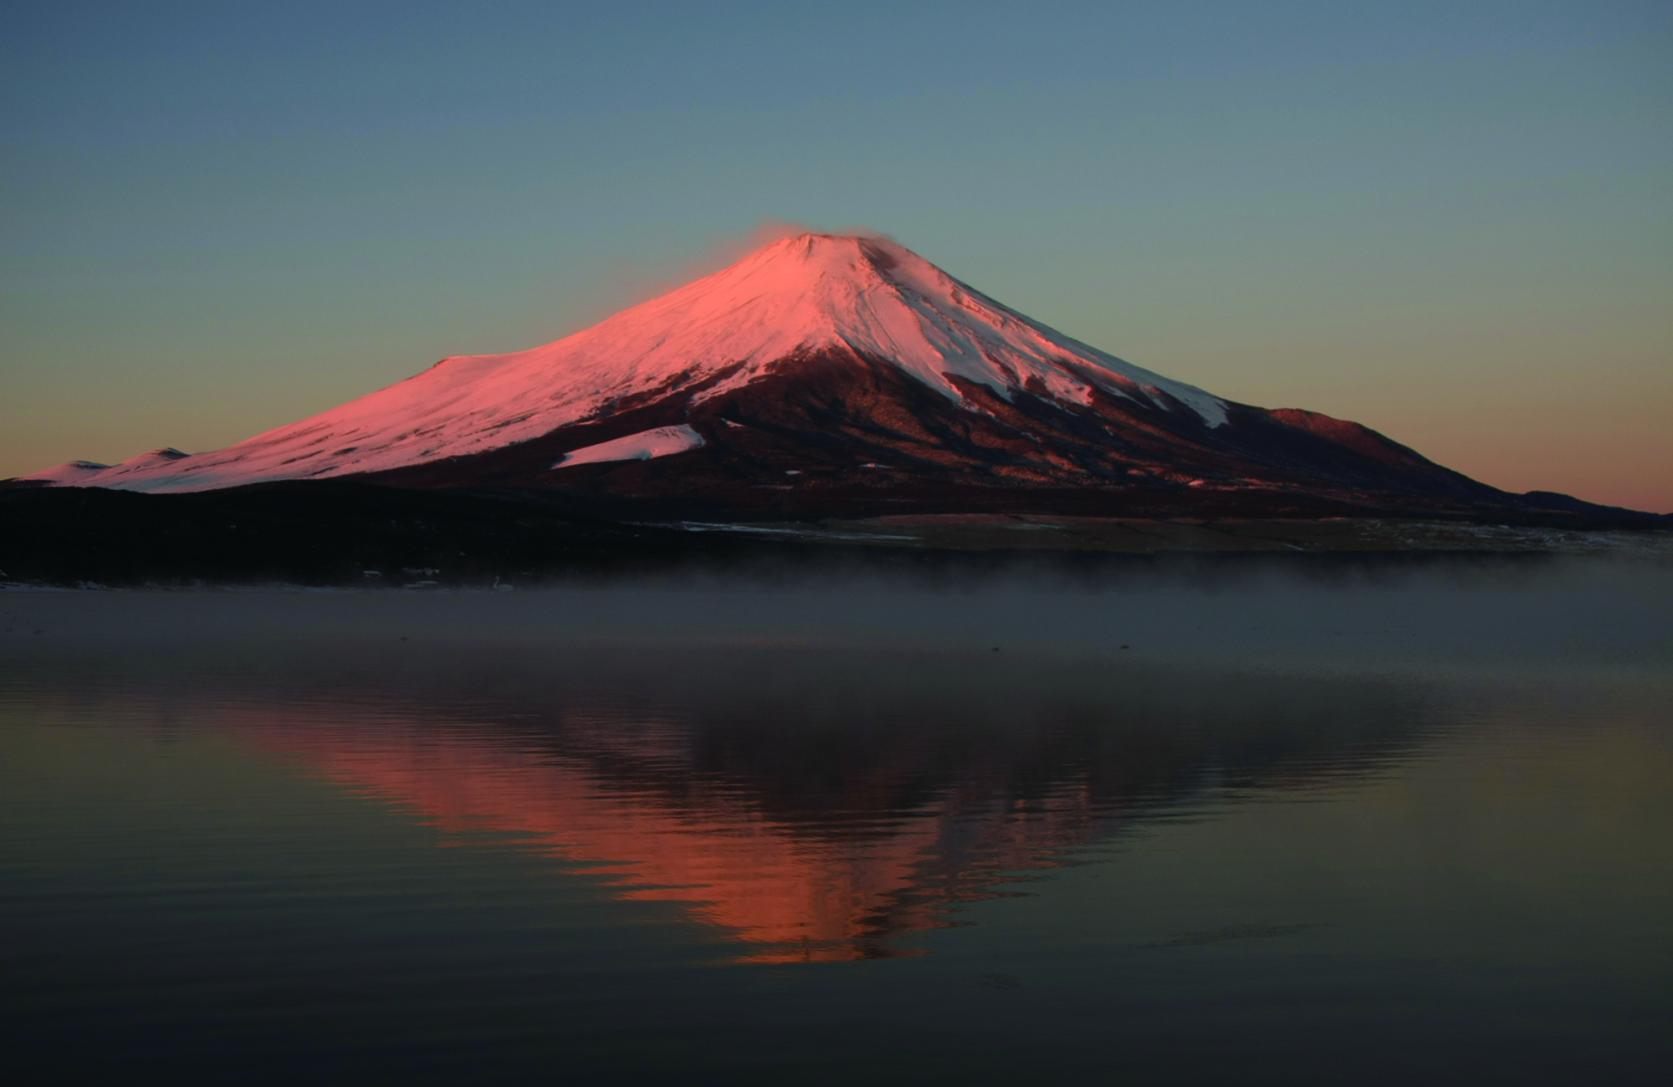 We will Take You to the Best Viewing Points to Photograph Mt. Fuji.-4